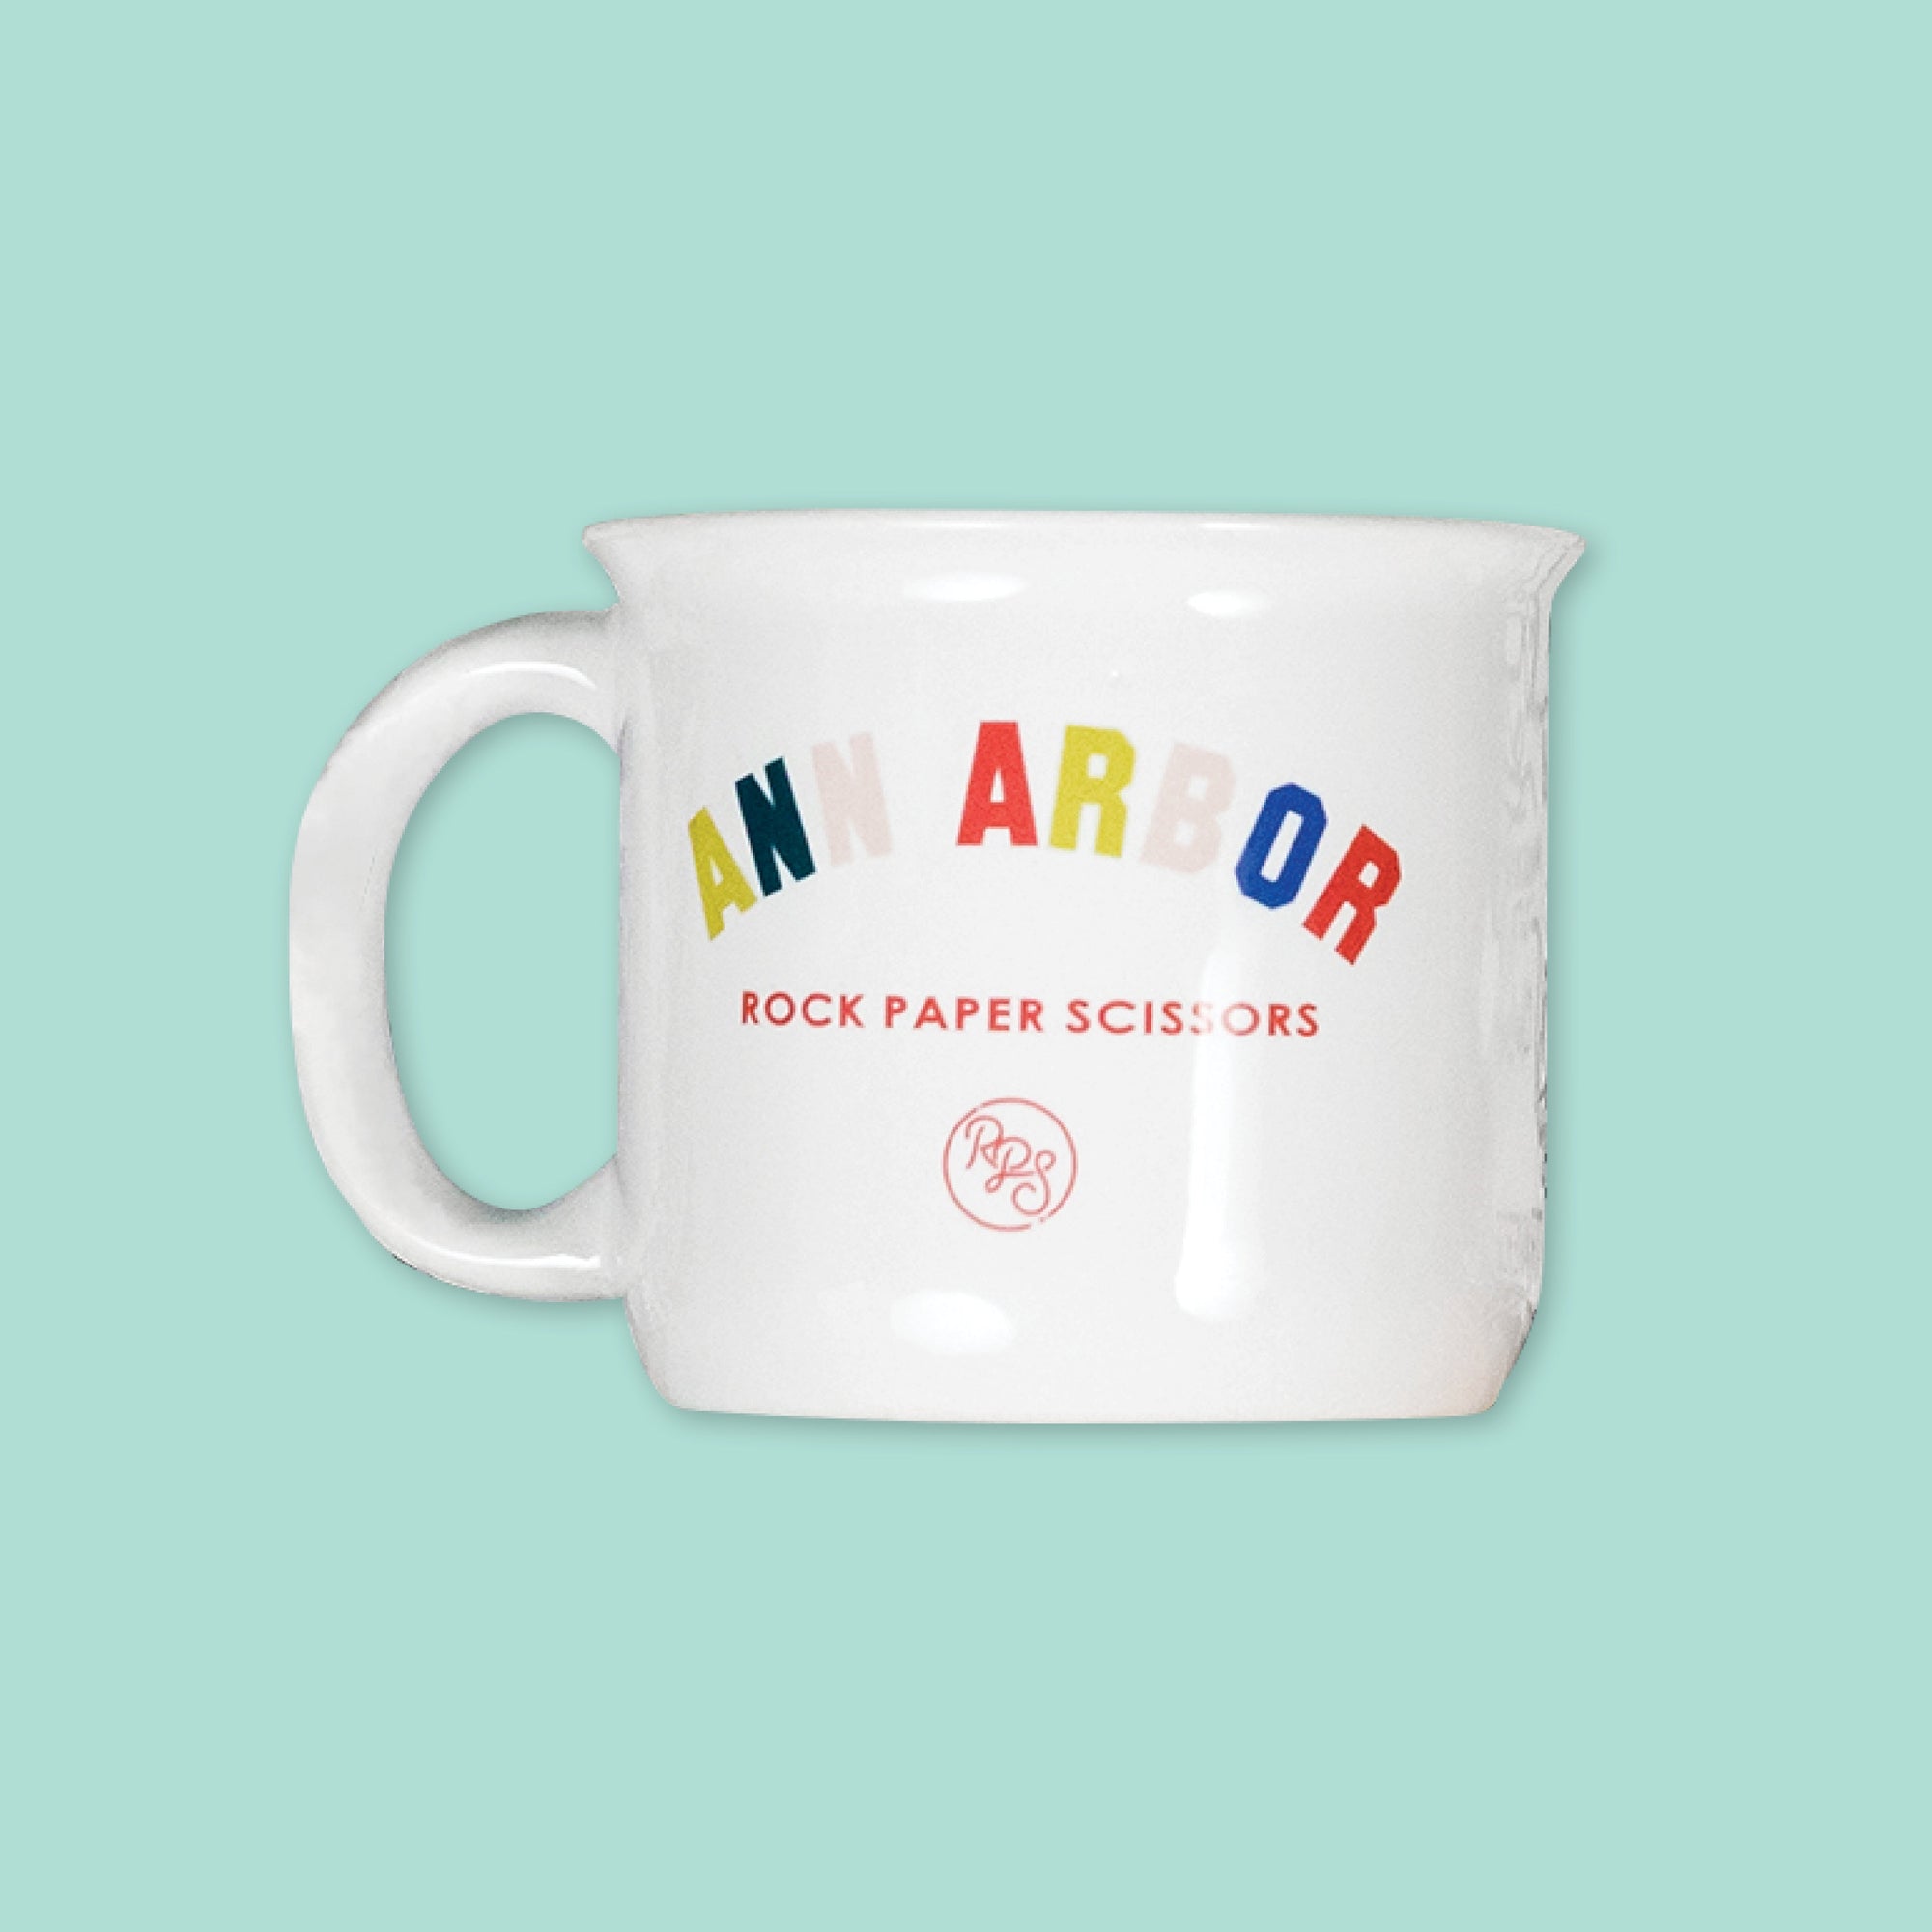 On a cool aqua background is a white mug with colorful collegiate font that says "Ann Arbor" with "ROCK PAPER SCISSORS" in red below it. 